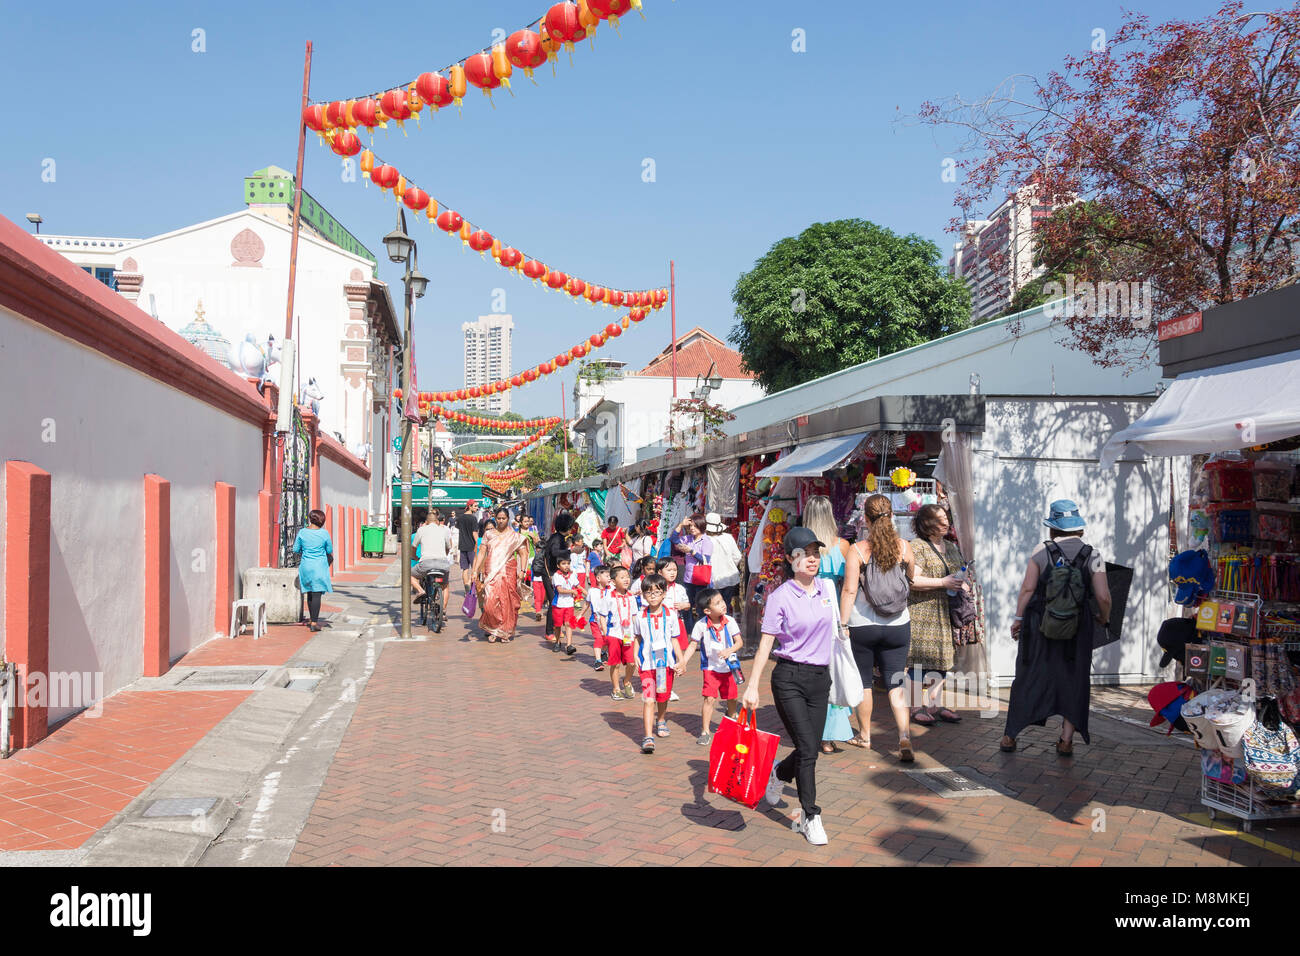 Children's school group on Pagoda Street, Chinatown, Outram District, Central Area, Singapore Island (Pulau Ujong), Singapore Stock Photo